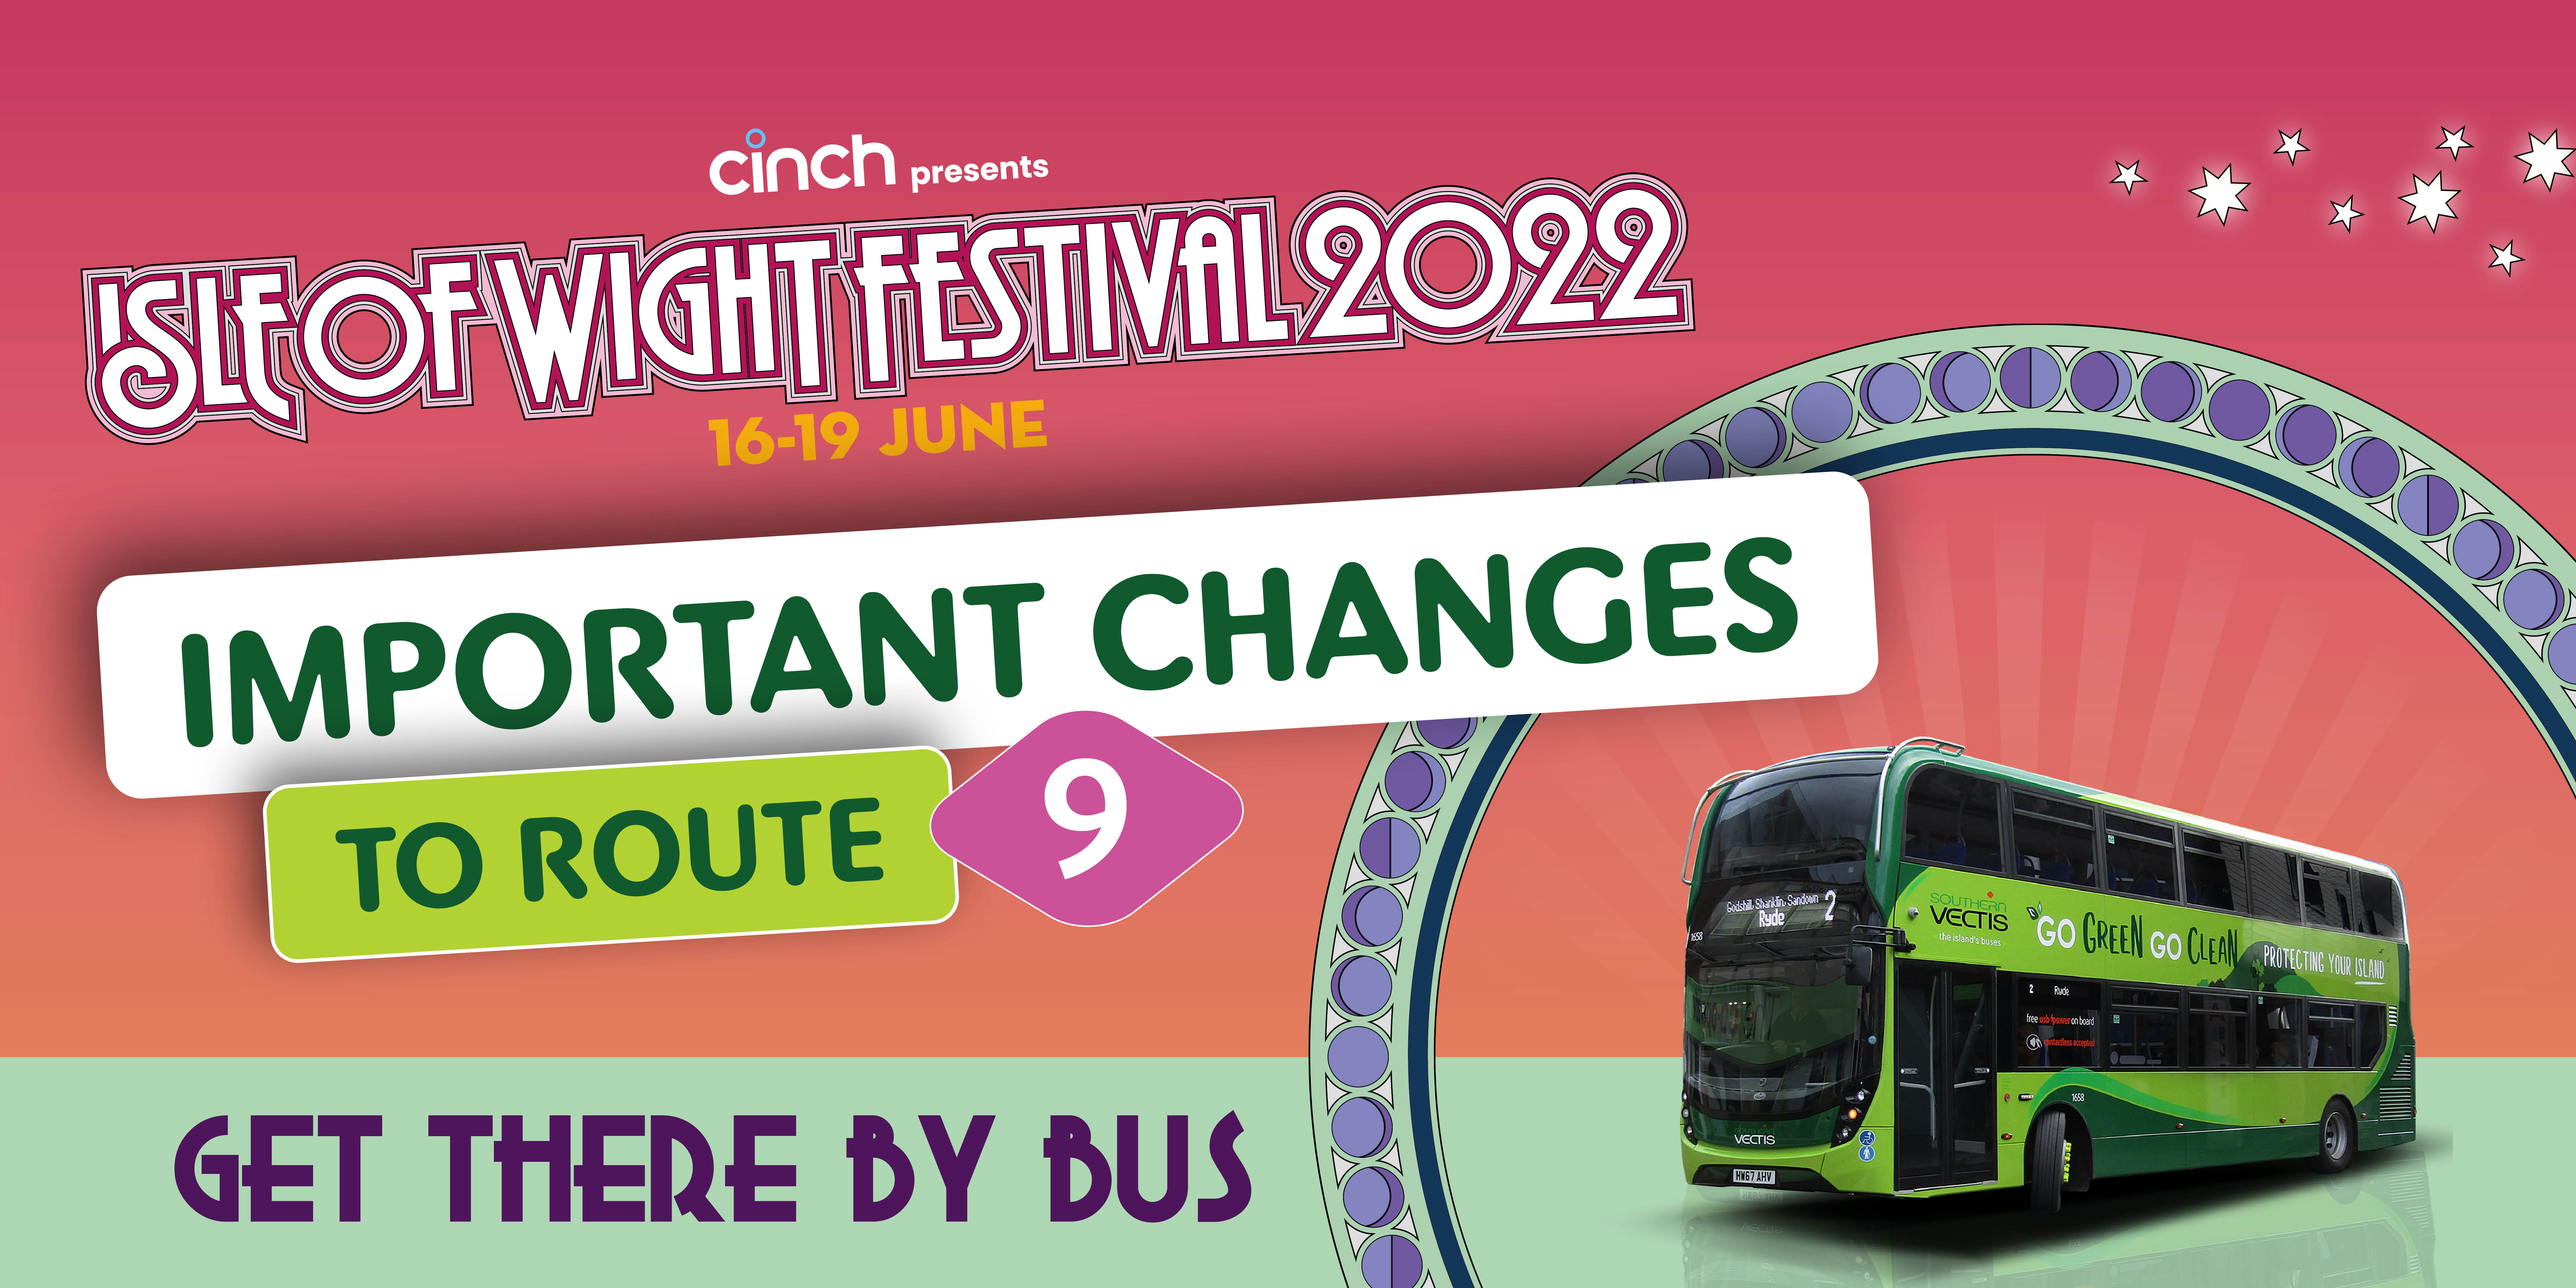 Important Changes to route 9 during The Isle of Wight Festival